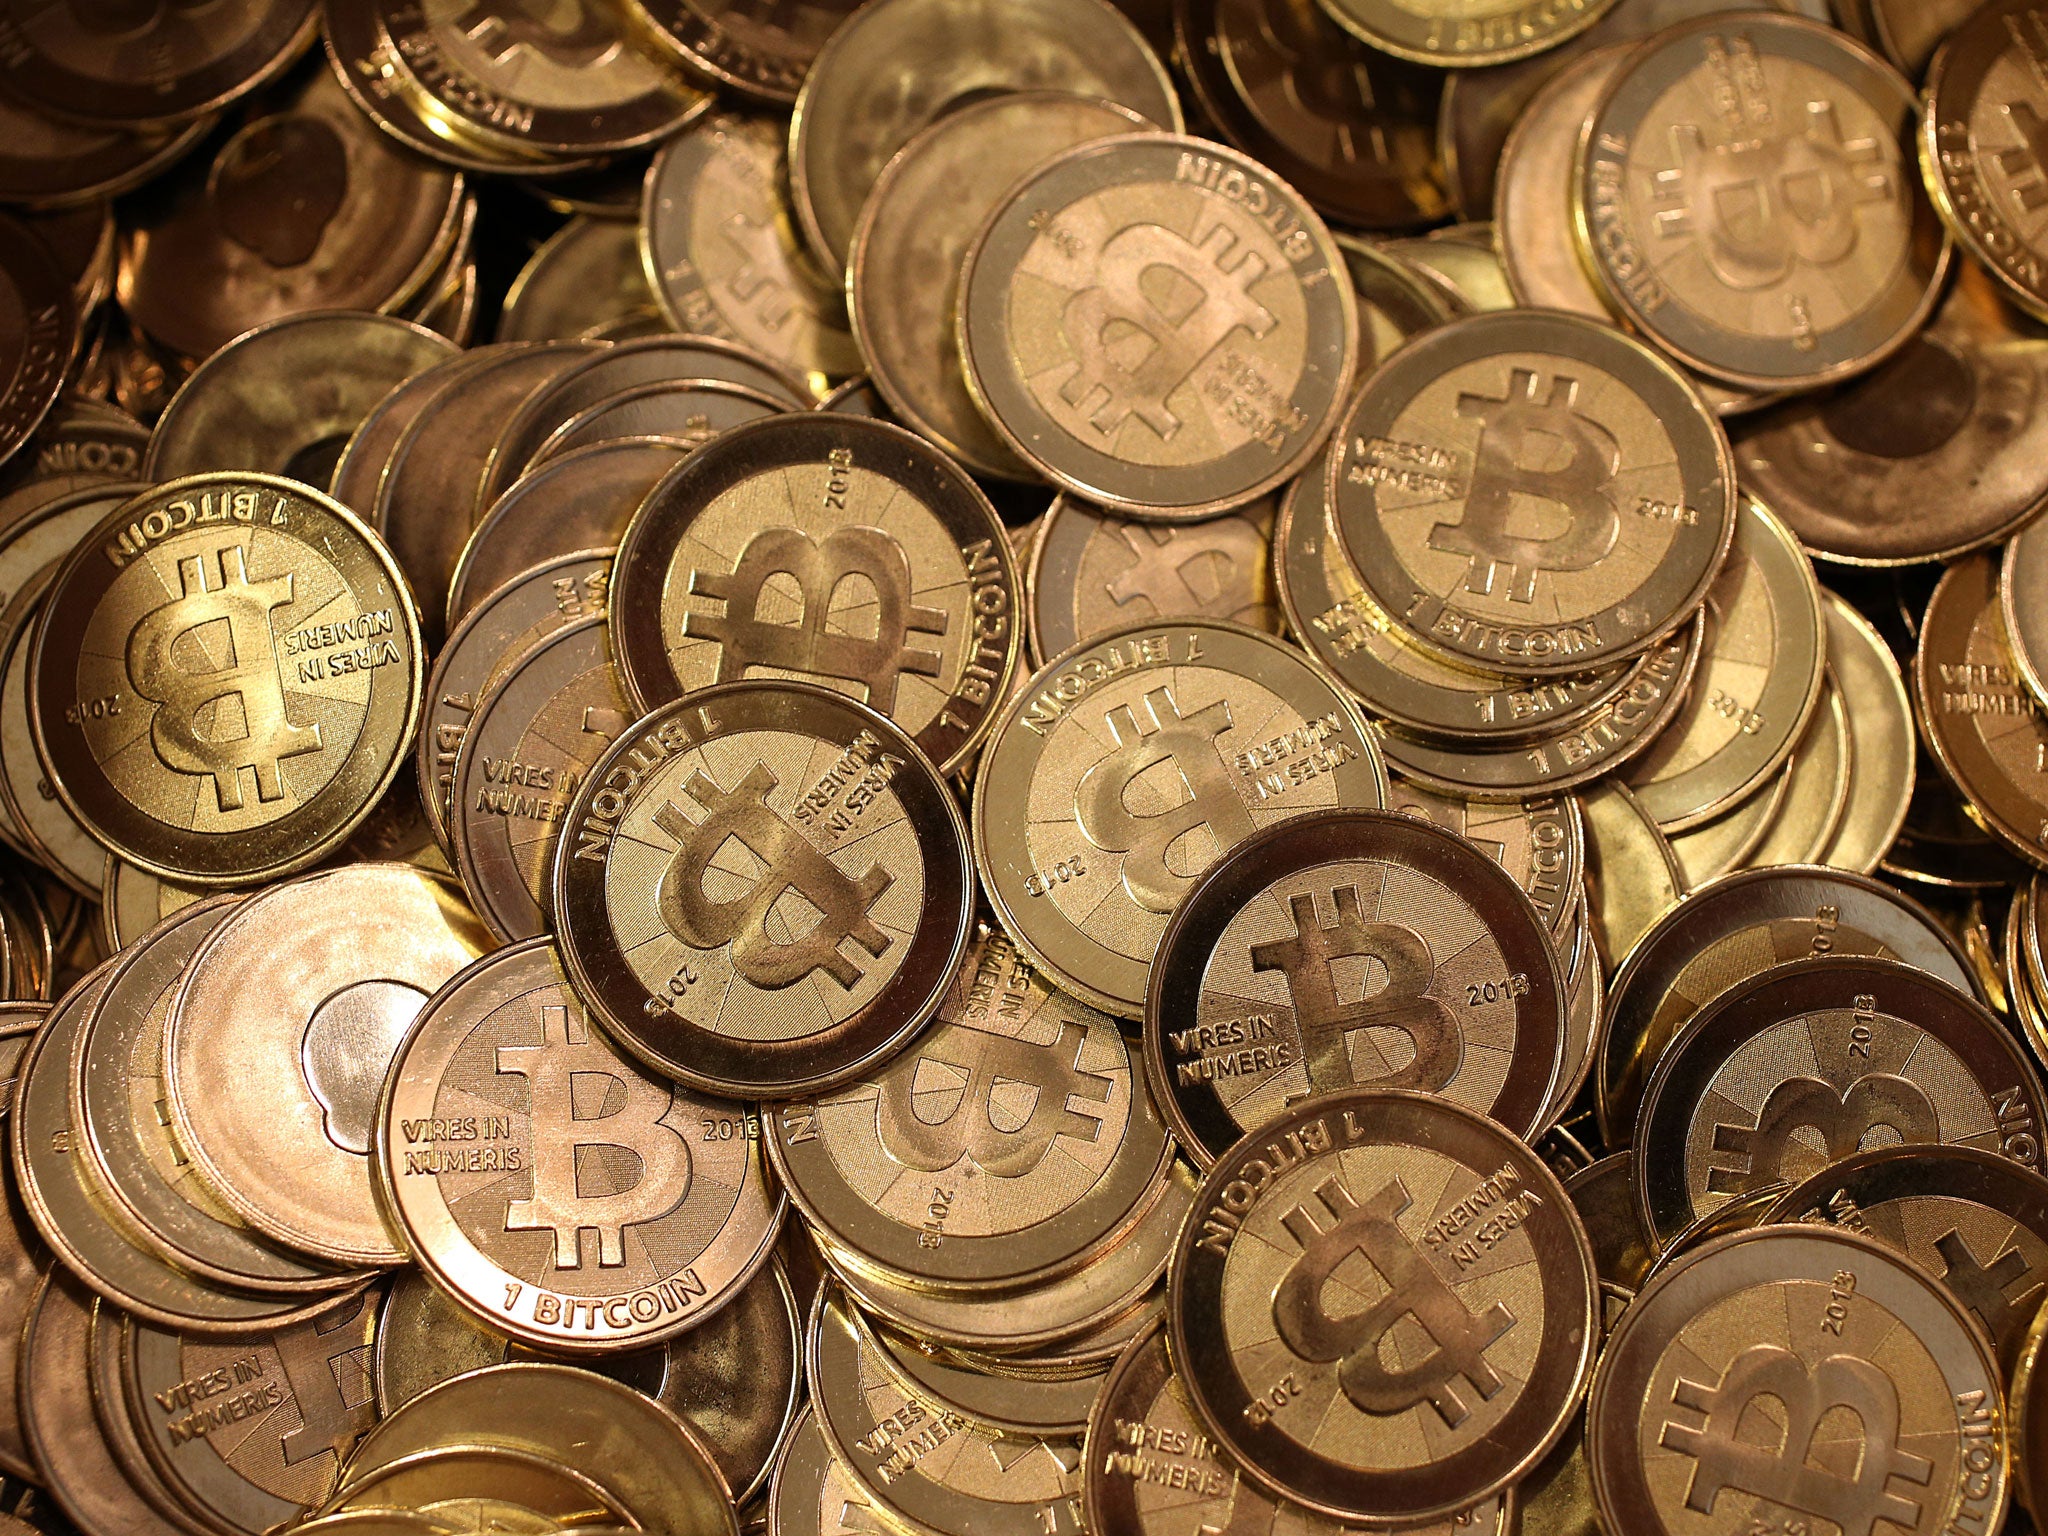 Prosecutors say they seized 144,336 bitcoins from Ulbricht's computers